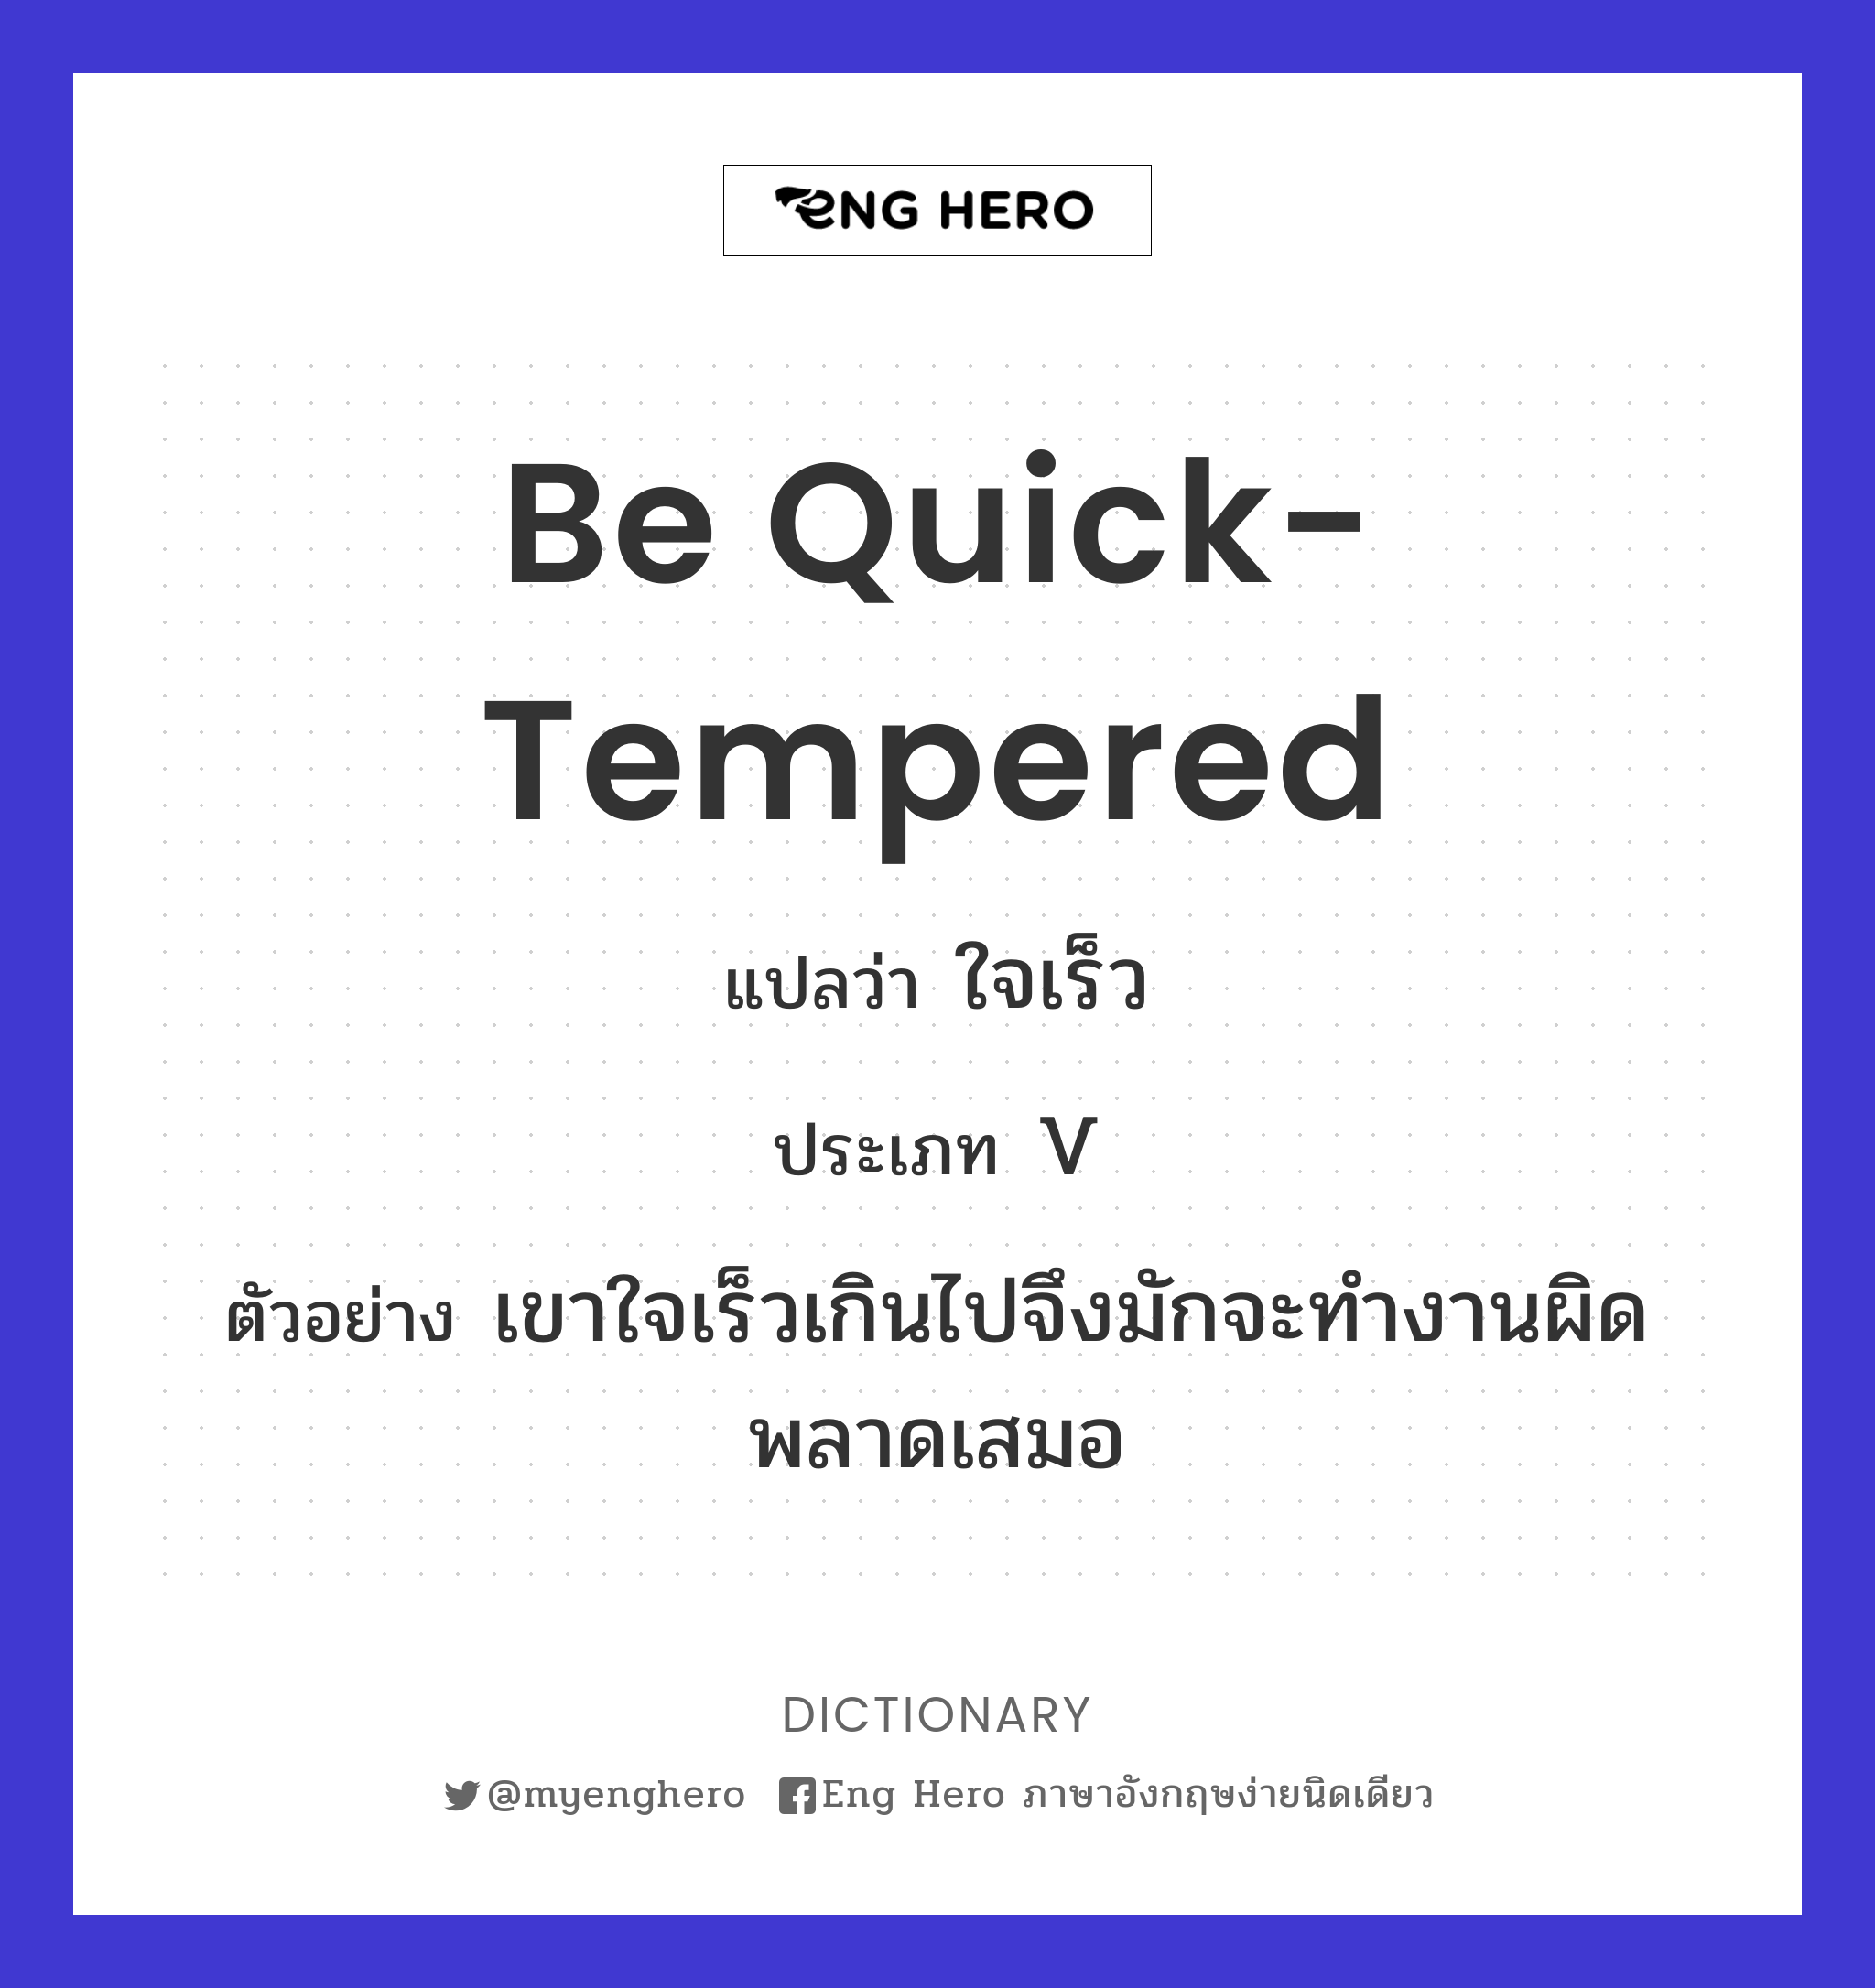 be quick-tempered